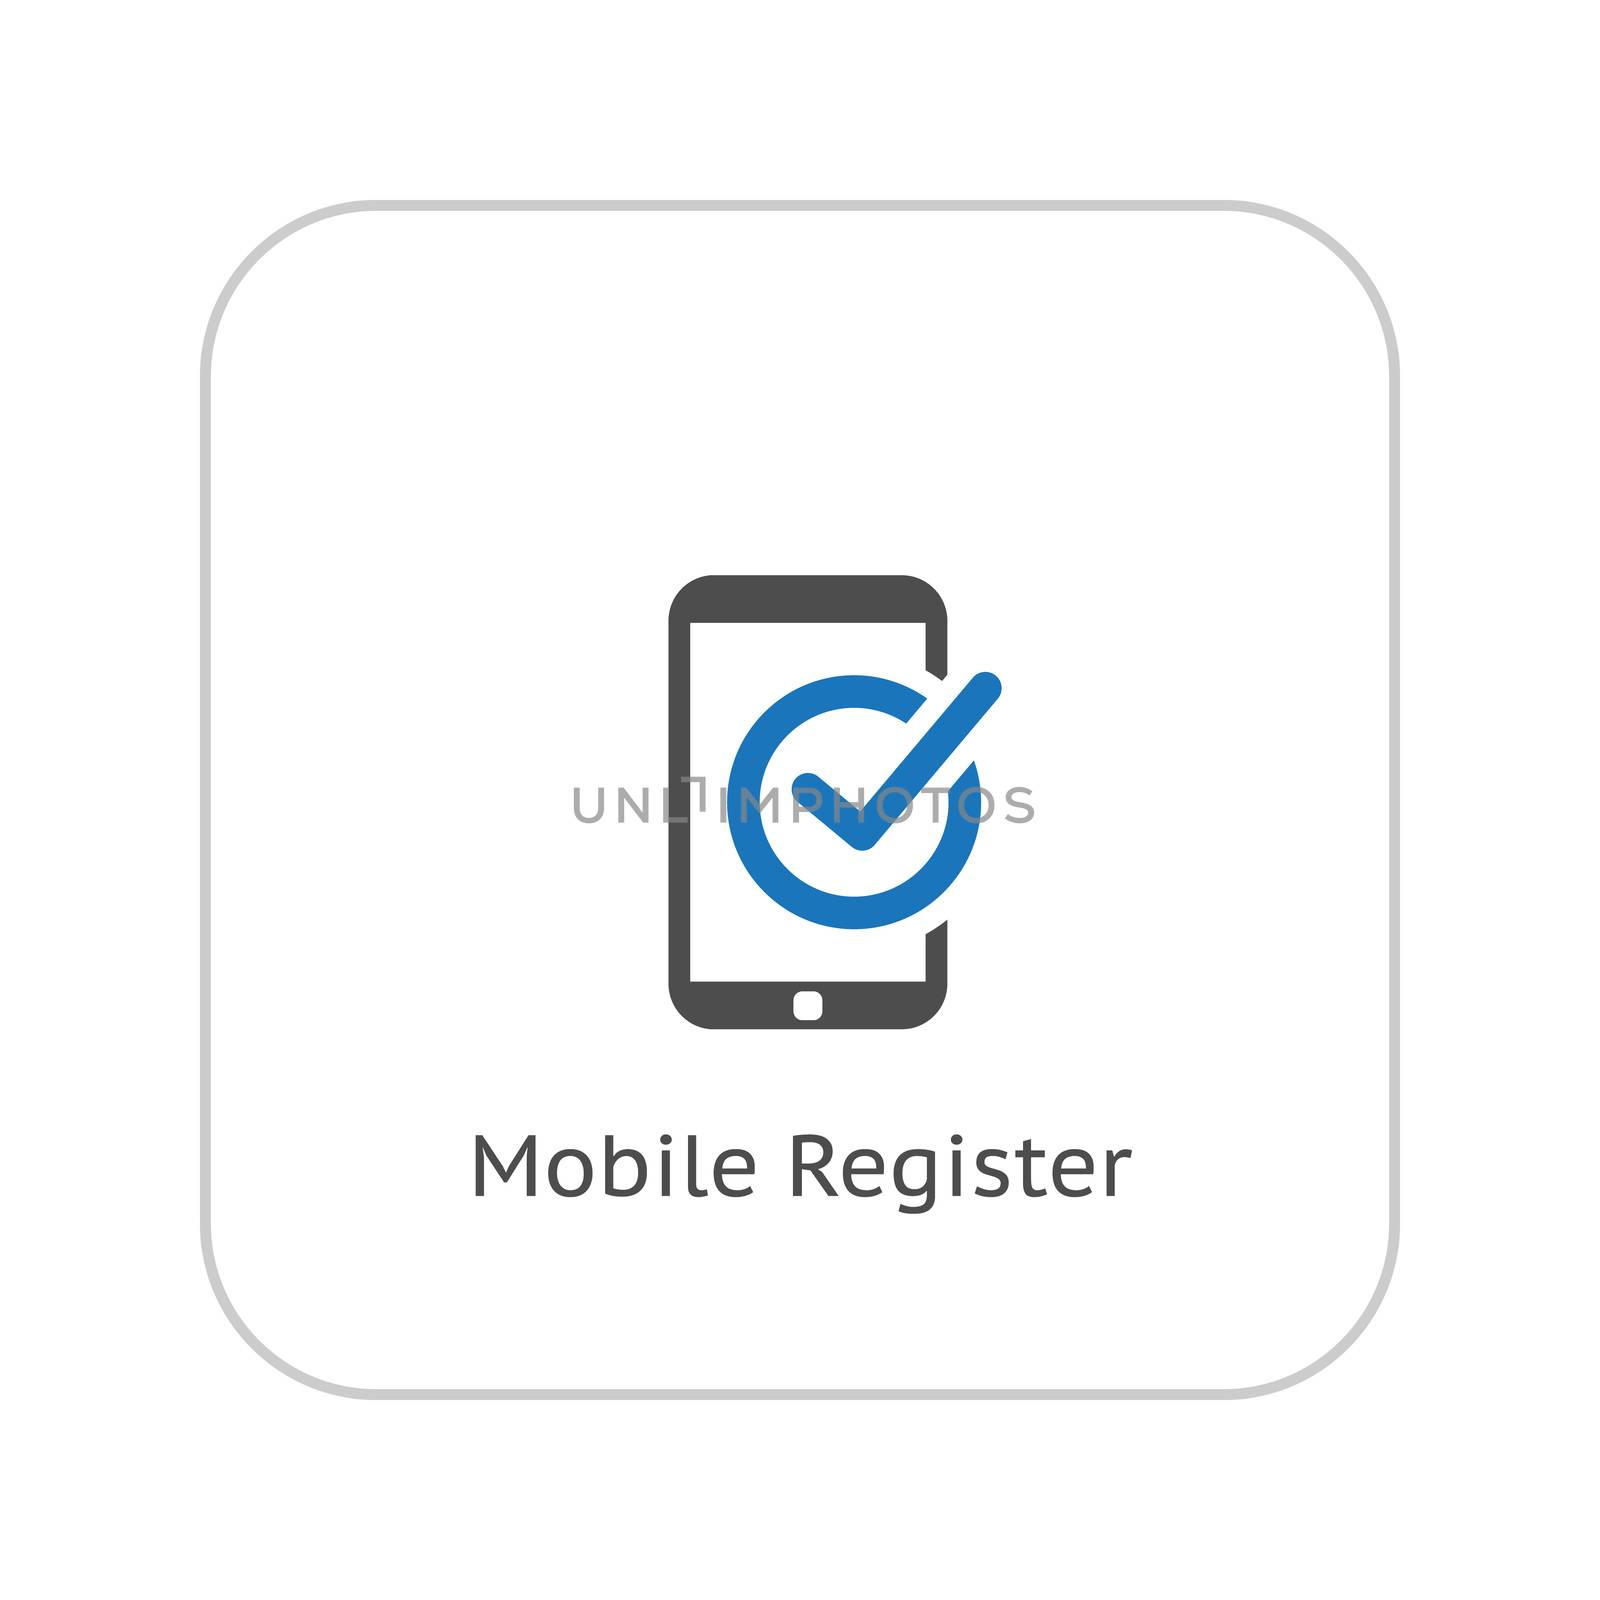 Mobile Register Icon. Online Learning. Flat Design. by WaD